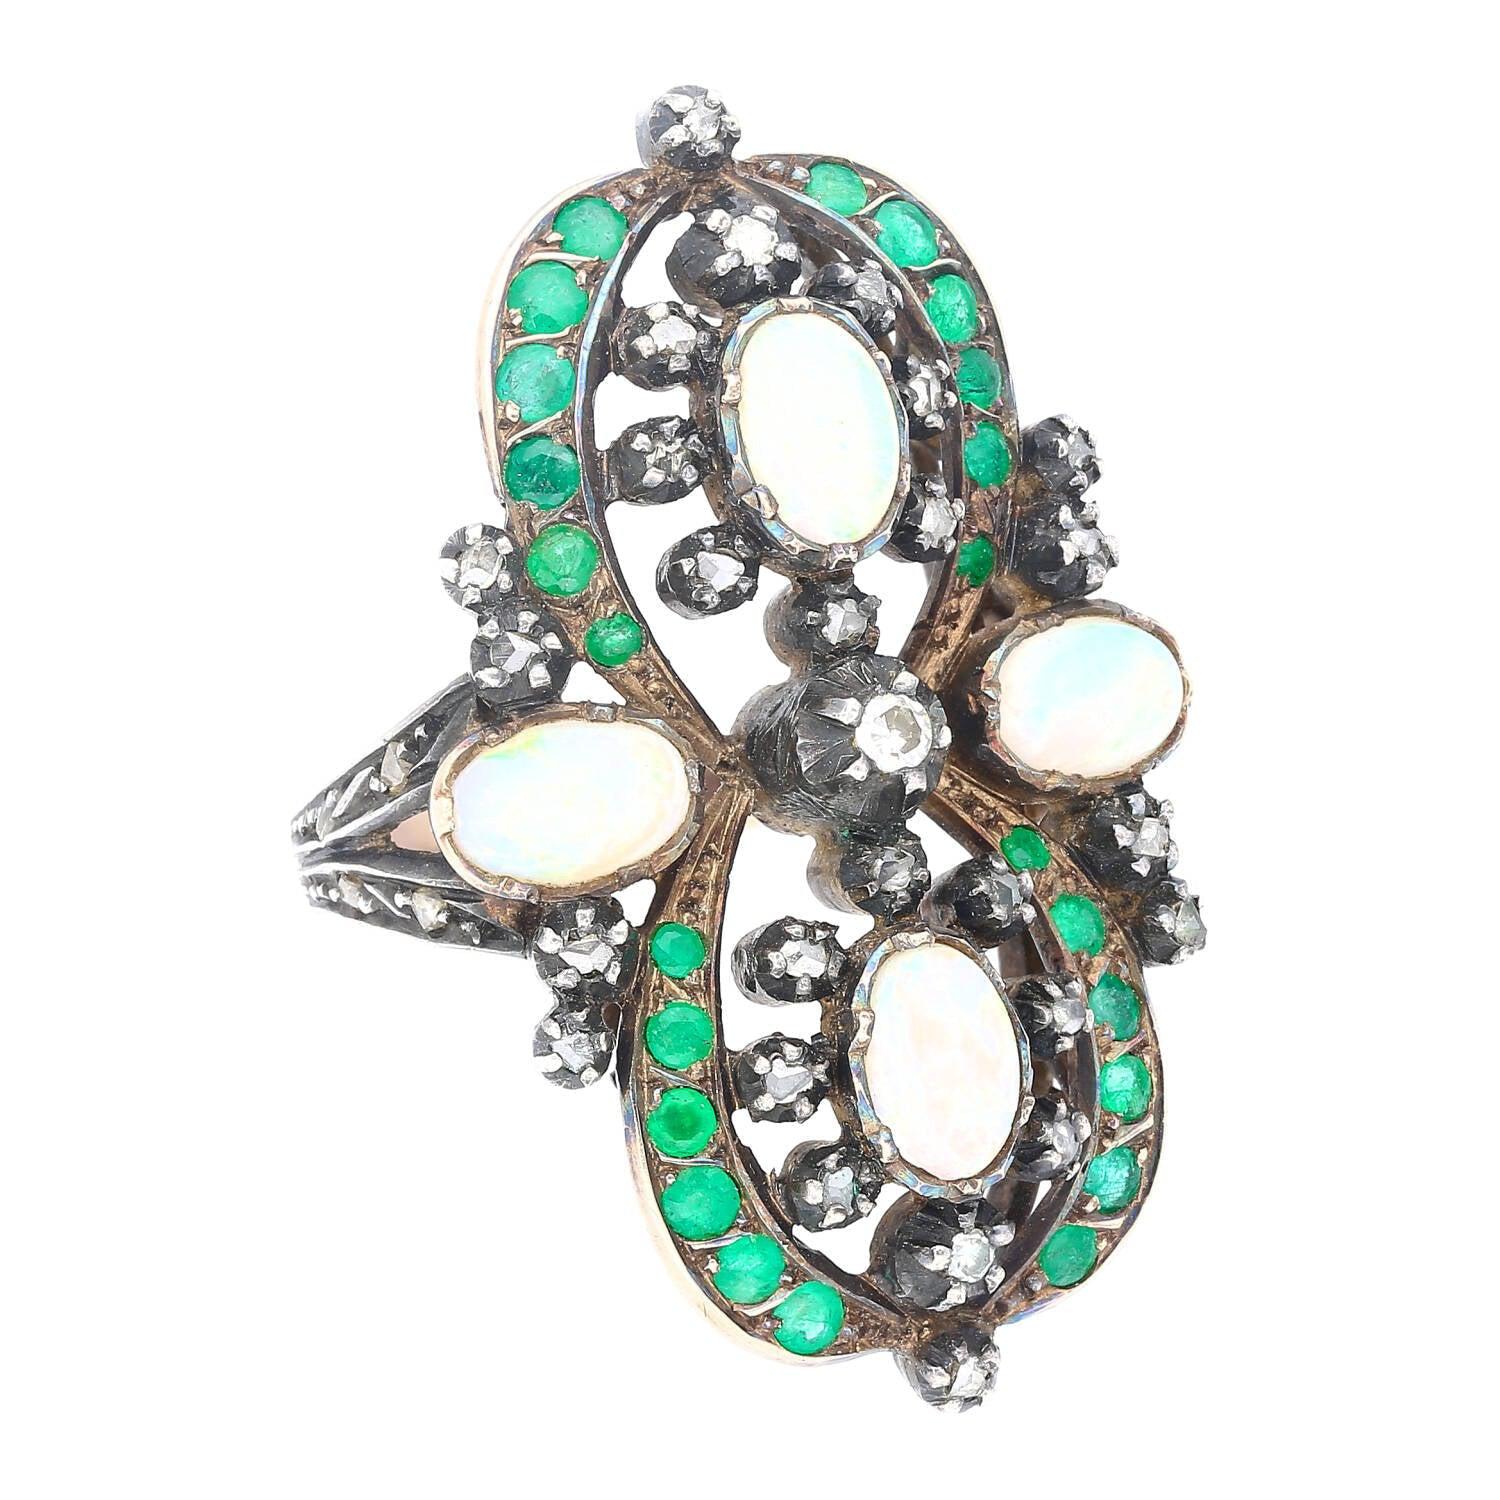 Antique Victorian Era 1800s Opal, Emerald, and Diamond Ring in Gold and Silver